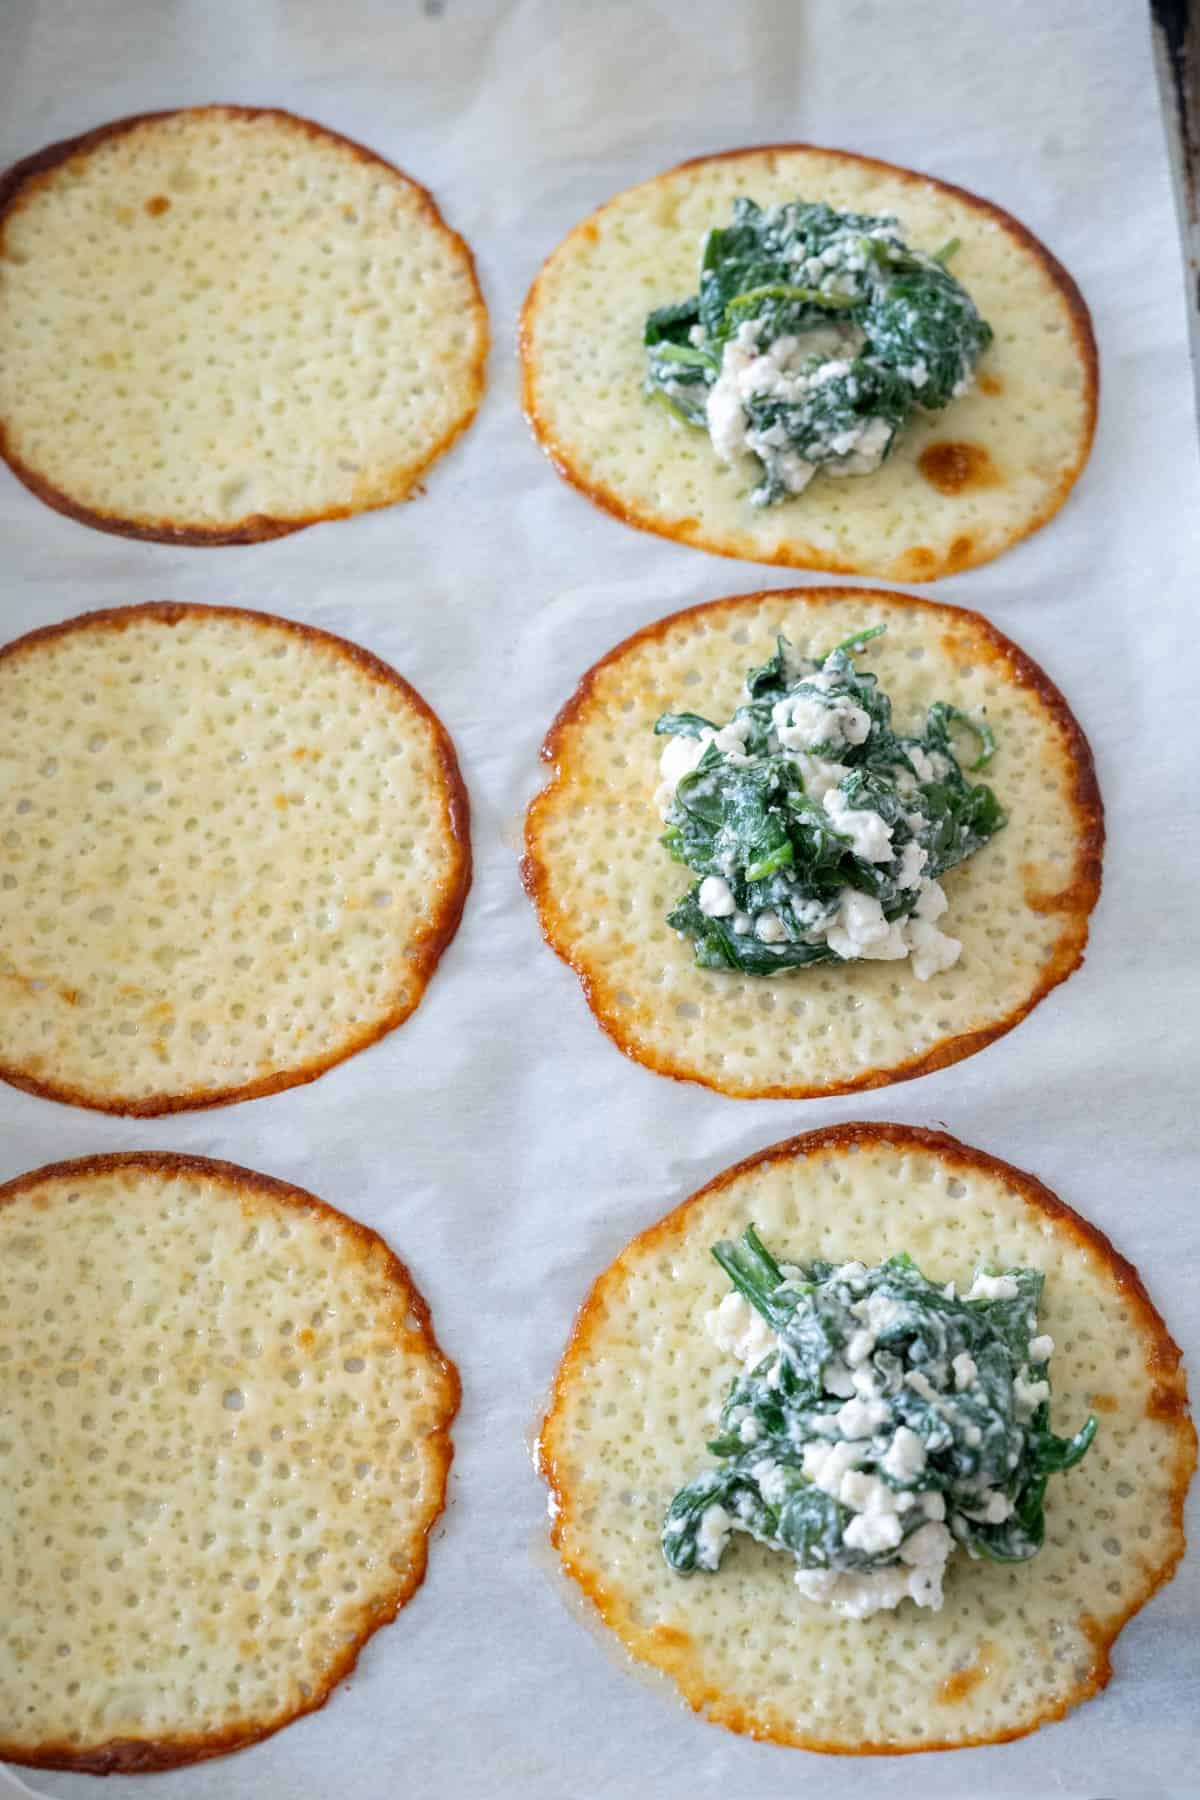 Six golden-brown cheese crisps on parchment paper, three topped with a spinach and cheese mixture.